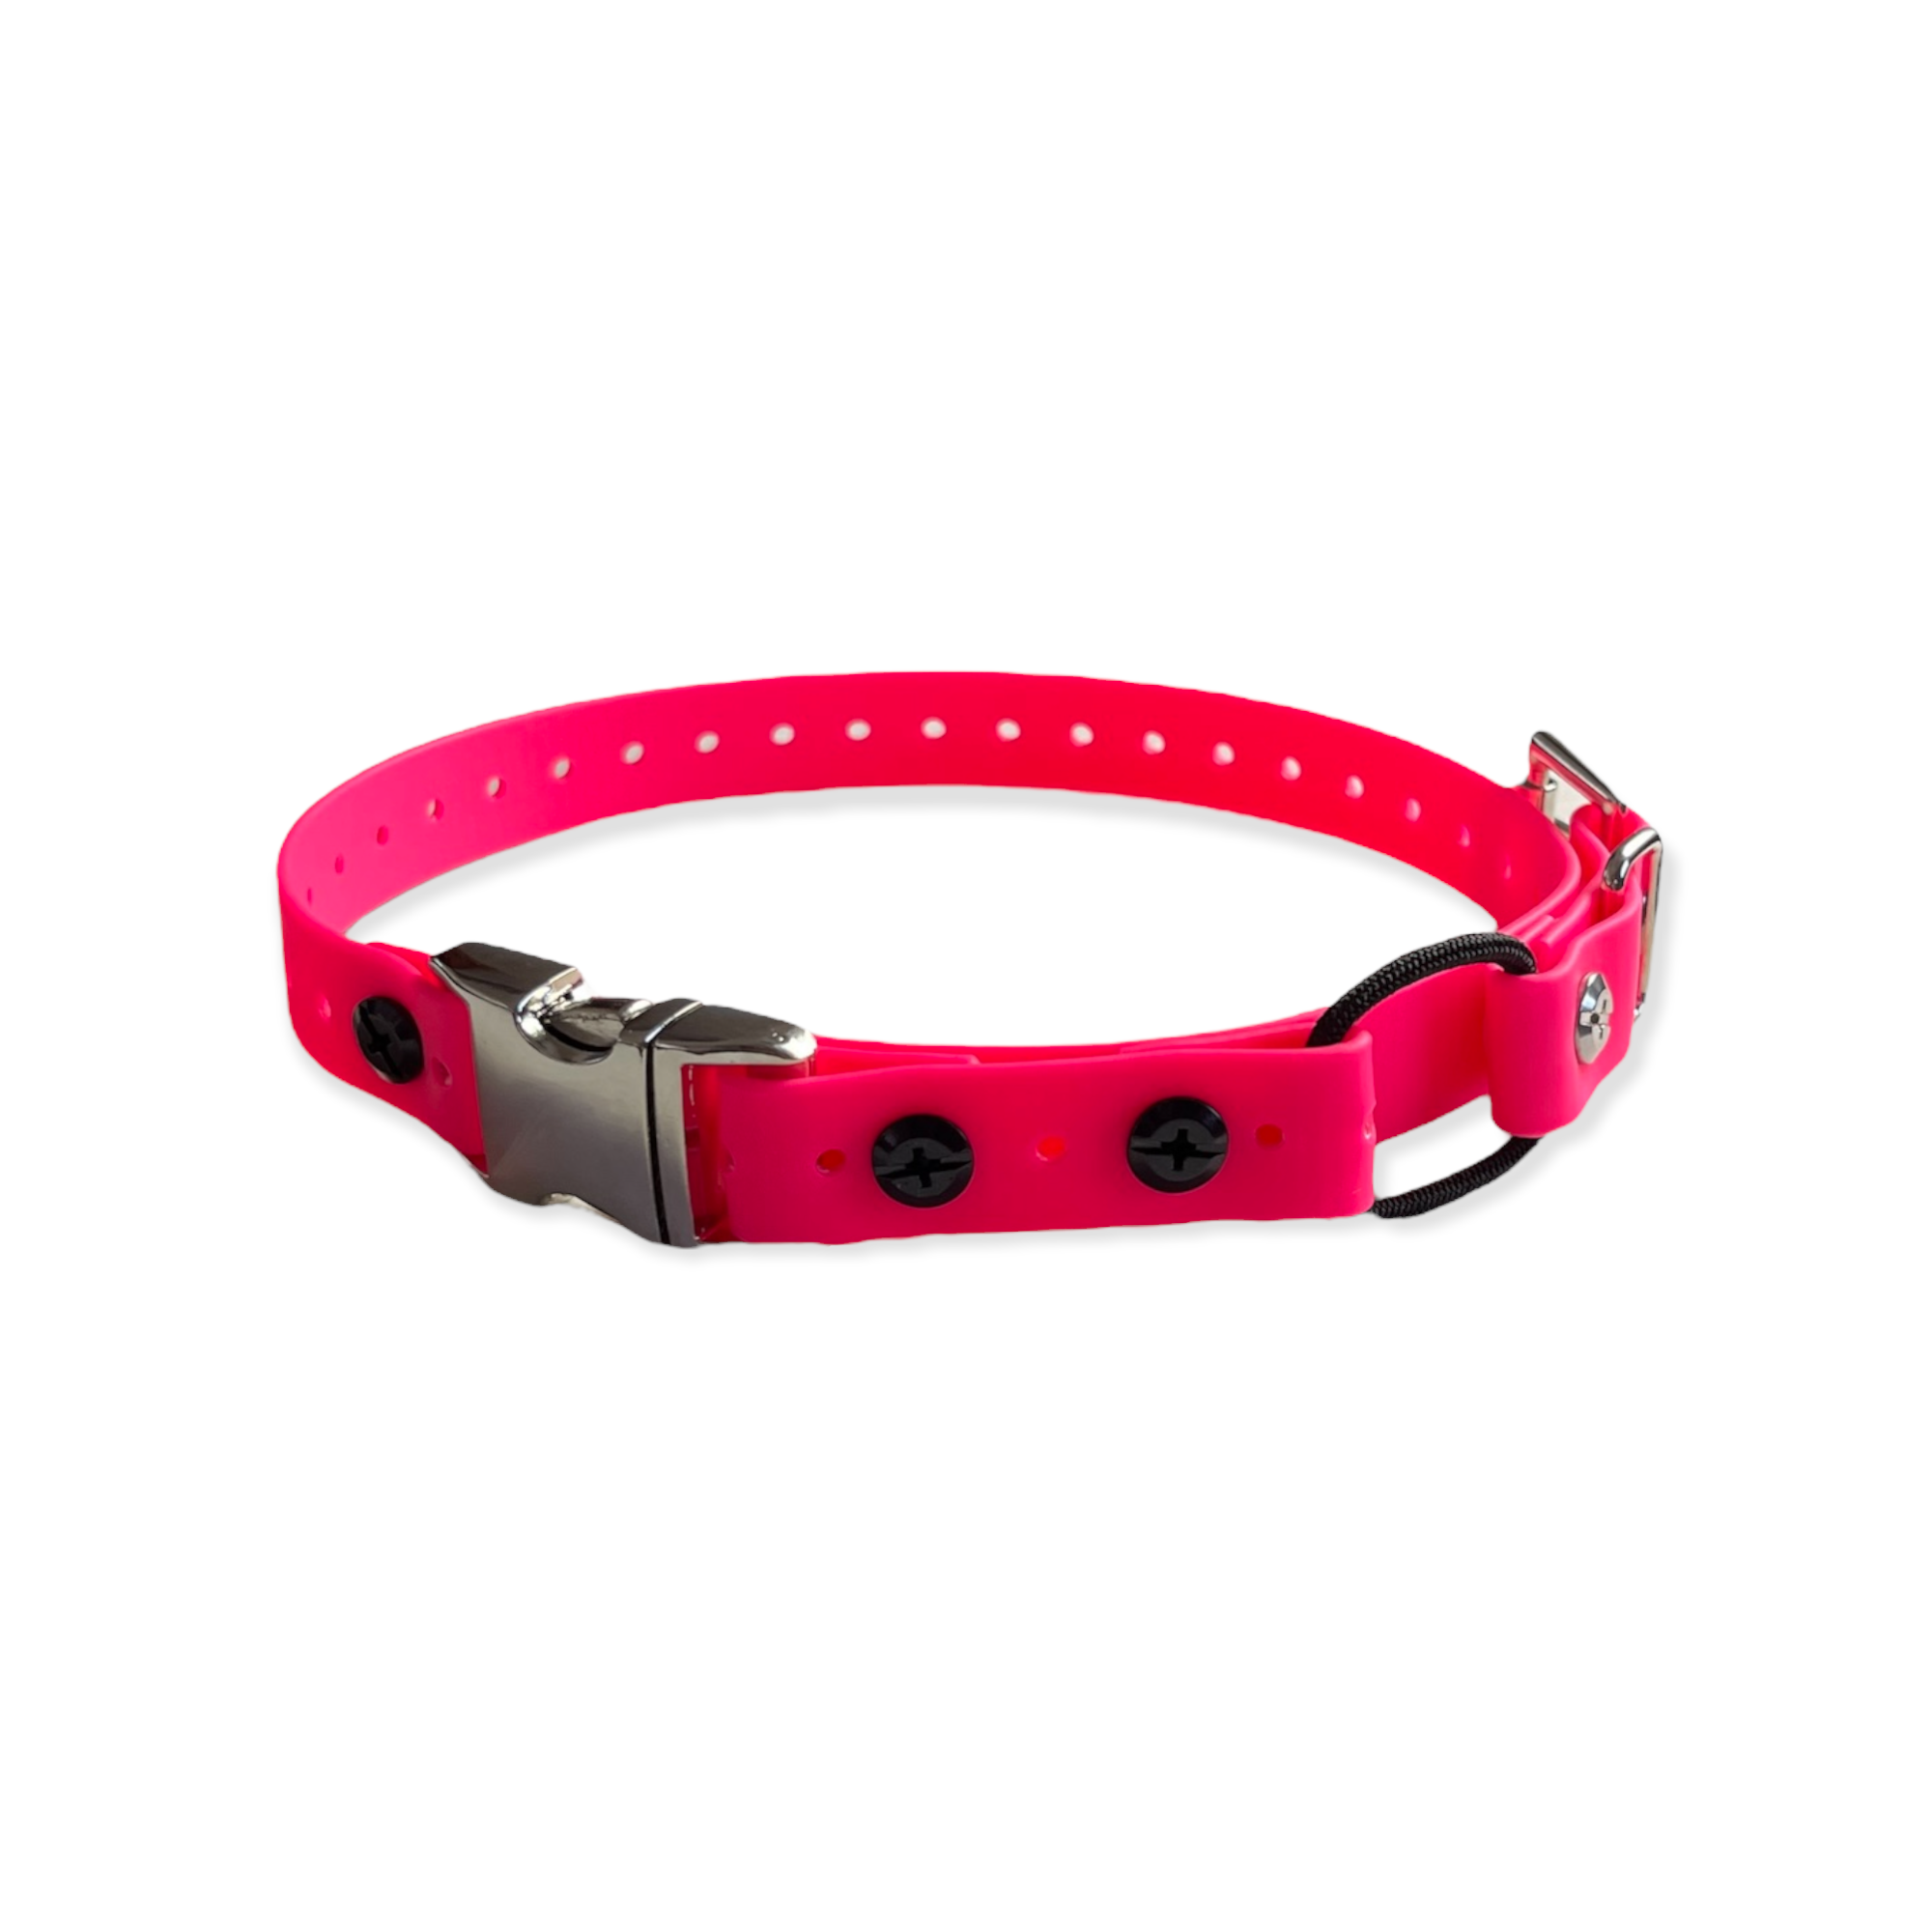 3/4 Quick Snap Mini Bungee Collar for Small Dogs - E-Collar